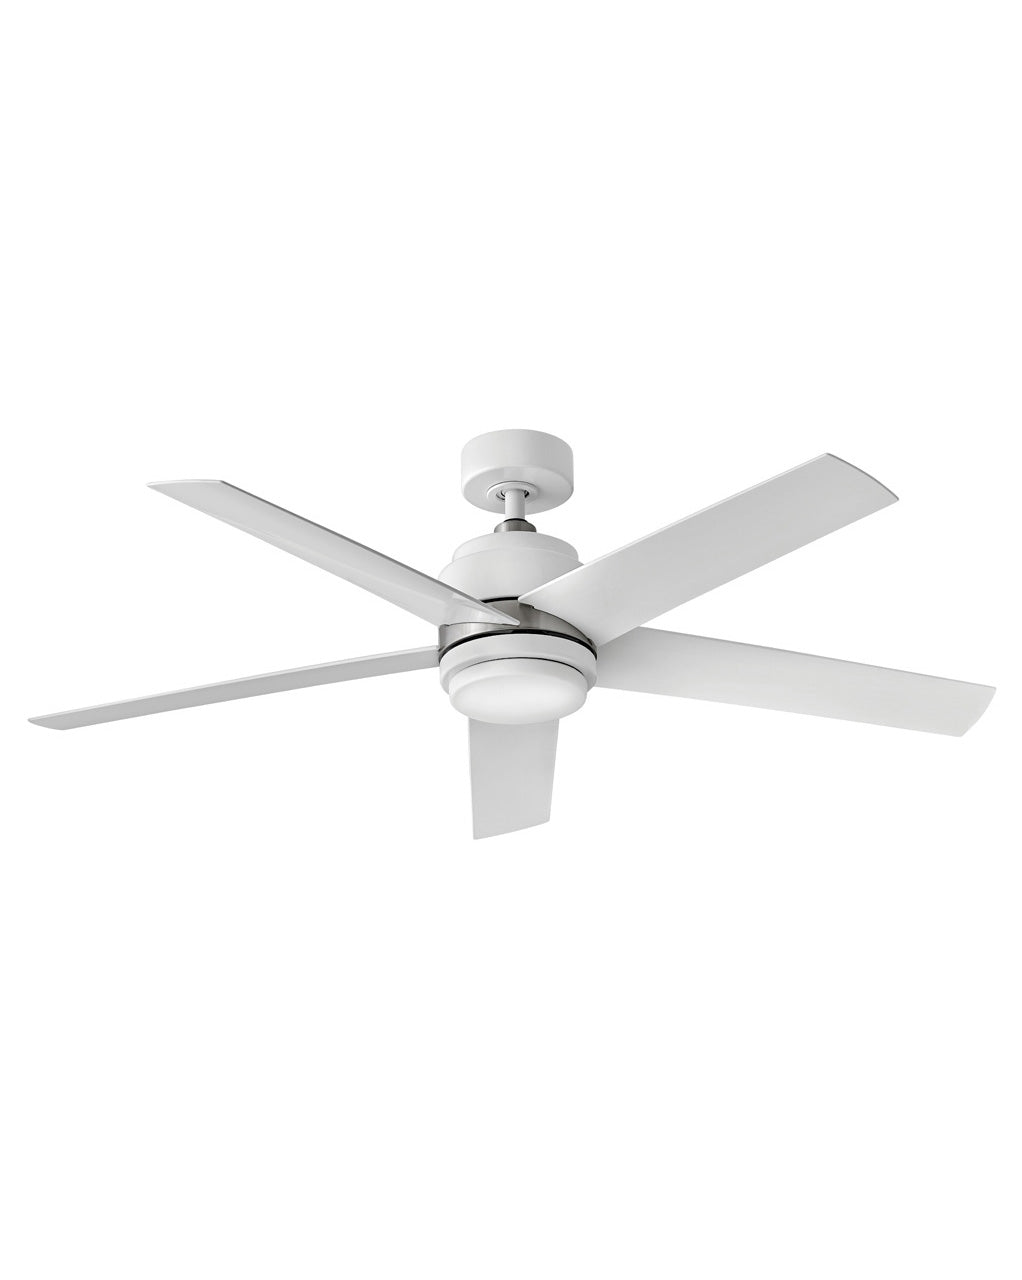 Hinkley Tier 54" LED 902054 Ceiling Fan Hinkley Appliance White with Brushed Nickel accent  